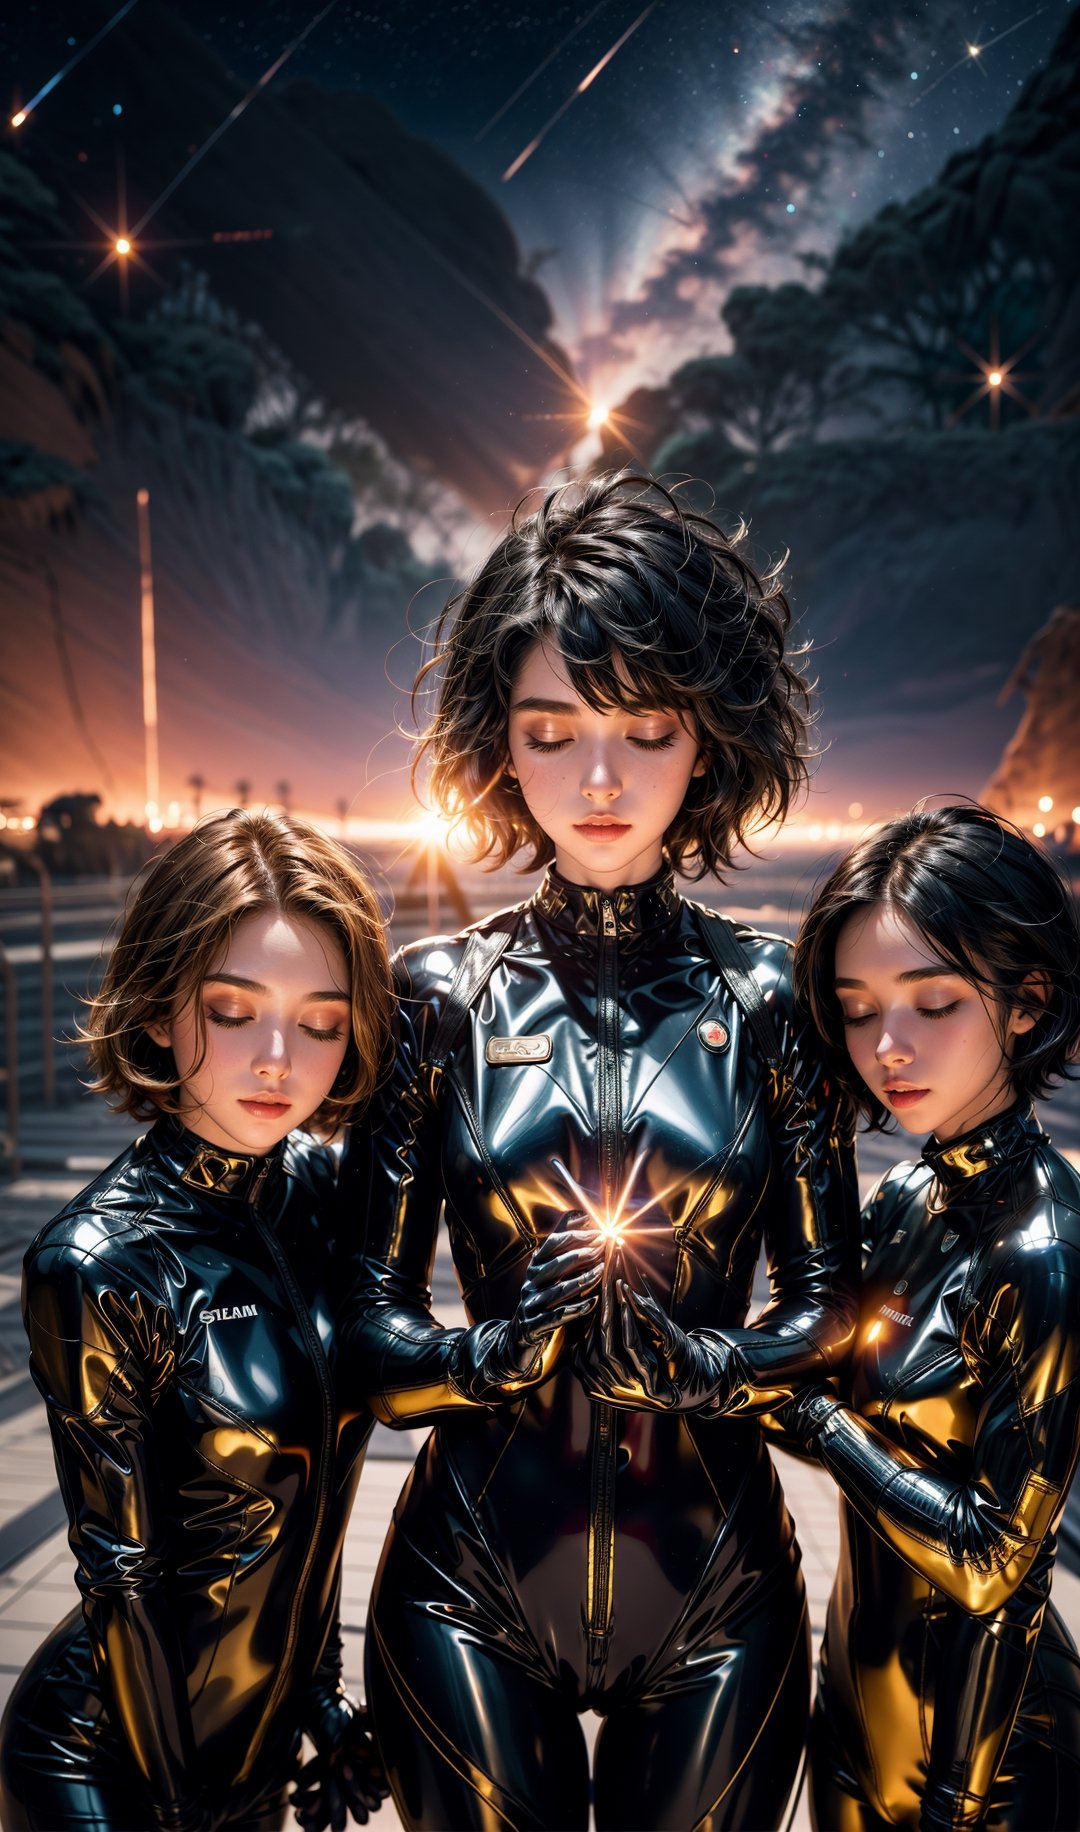 3 girls , in galaxy, sun, stars, flying pose, closed_eyes, short hair, various space suit, star in the palm of the hand, shinny hair,